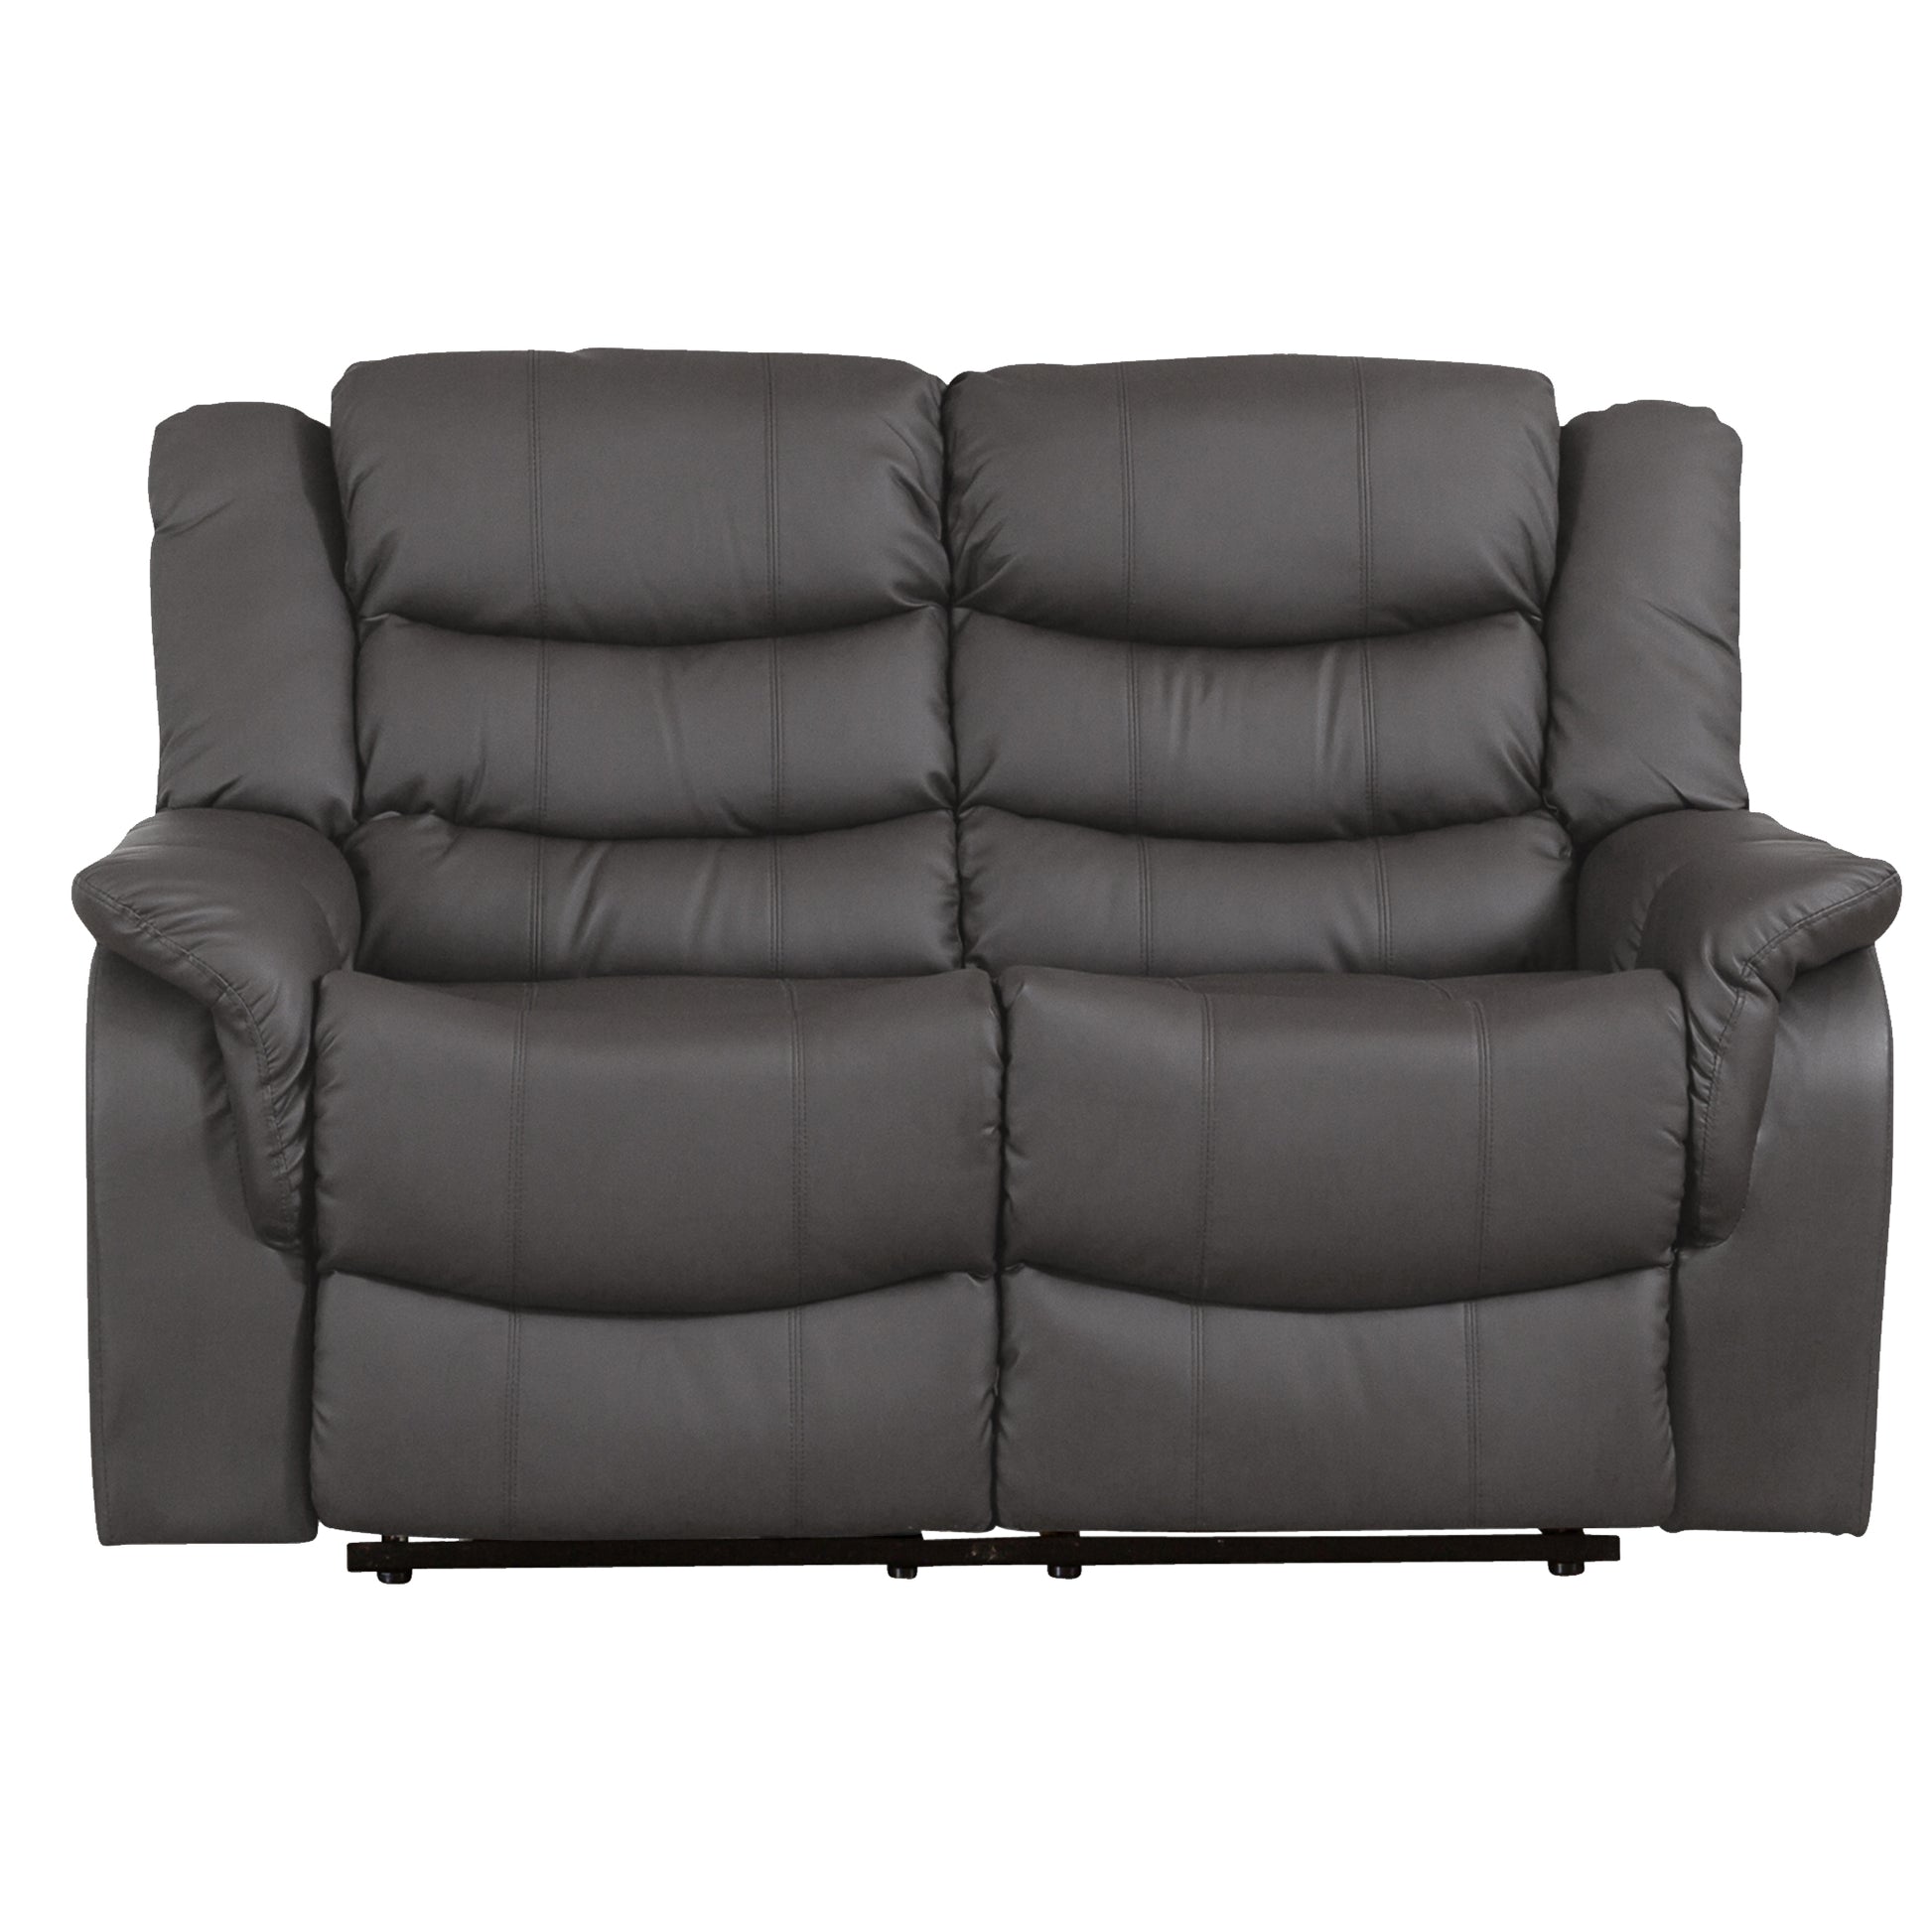 Mid Size Commercial Grade Leather Recliner Sofa Available in Black, Brown, Burgundy, Cream, Grey * - CasaFenix